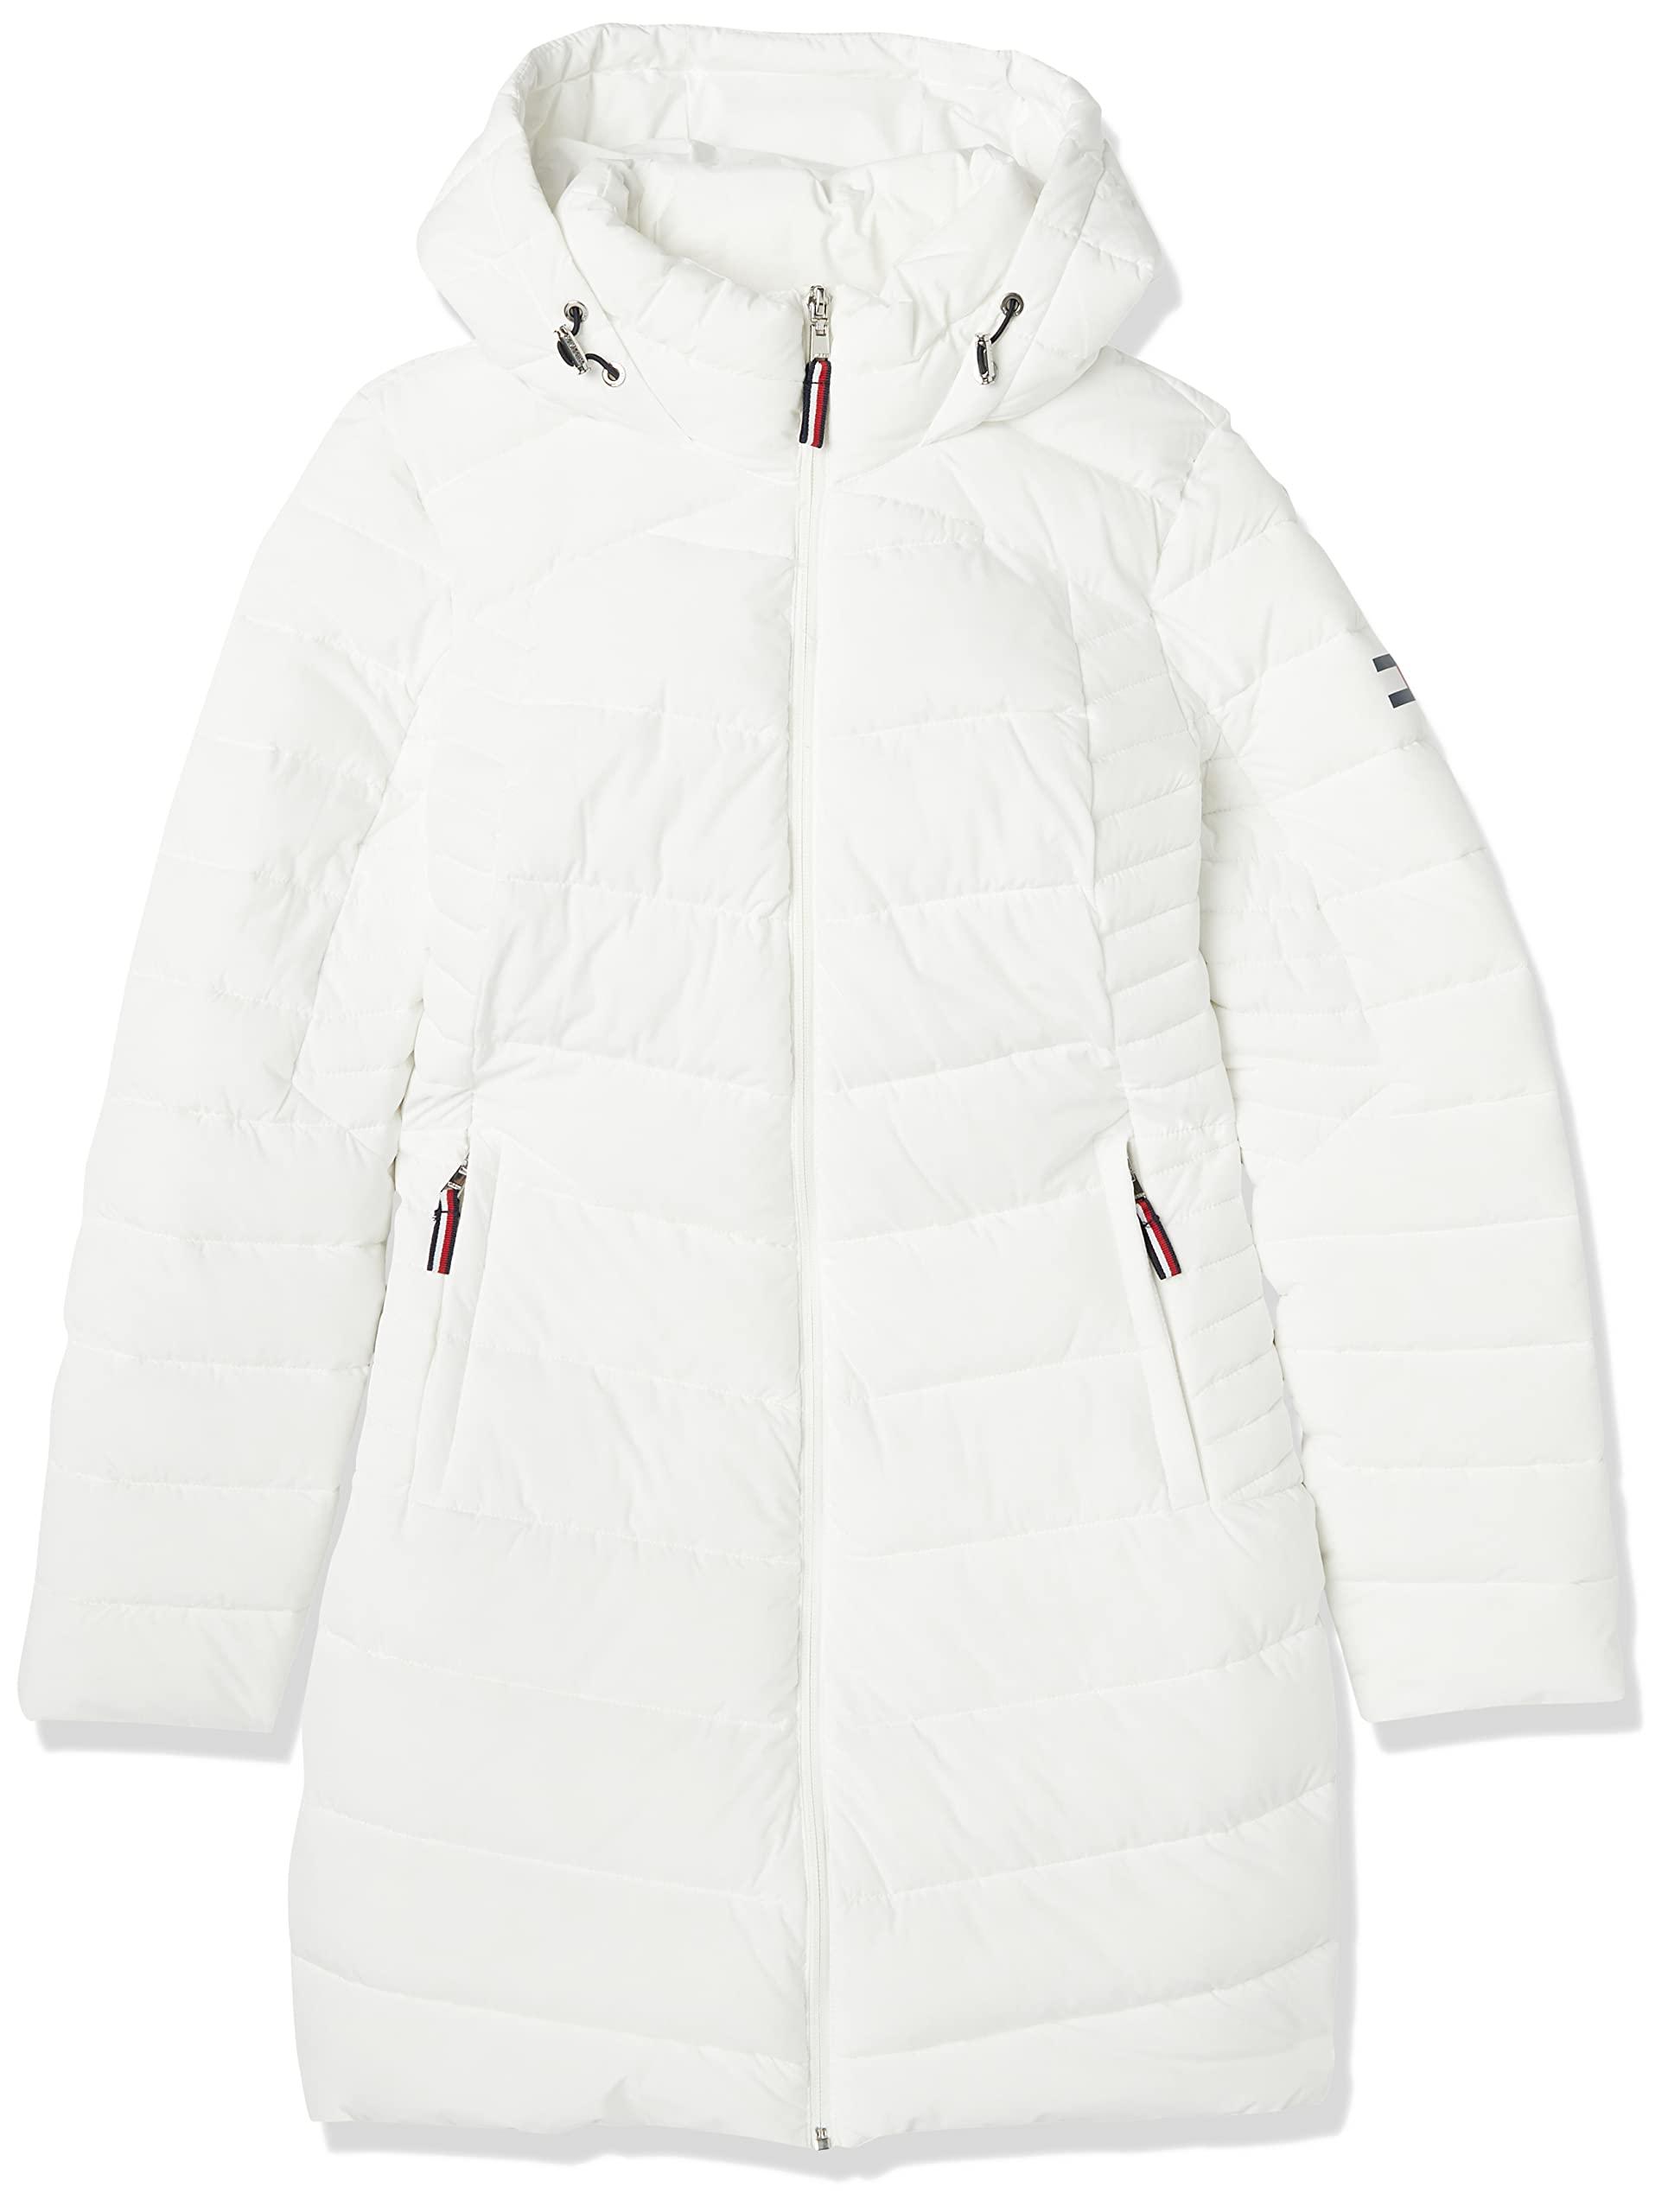 Tommy Hilfiger Tw2mp164-wht-medium Long Packable Jacket in White | Lyst